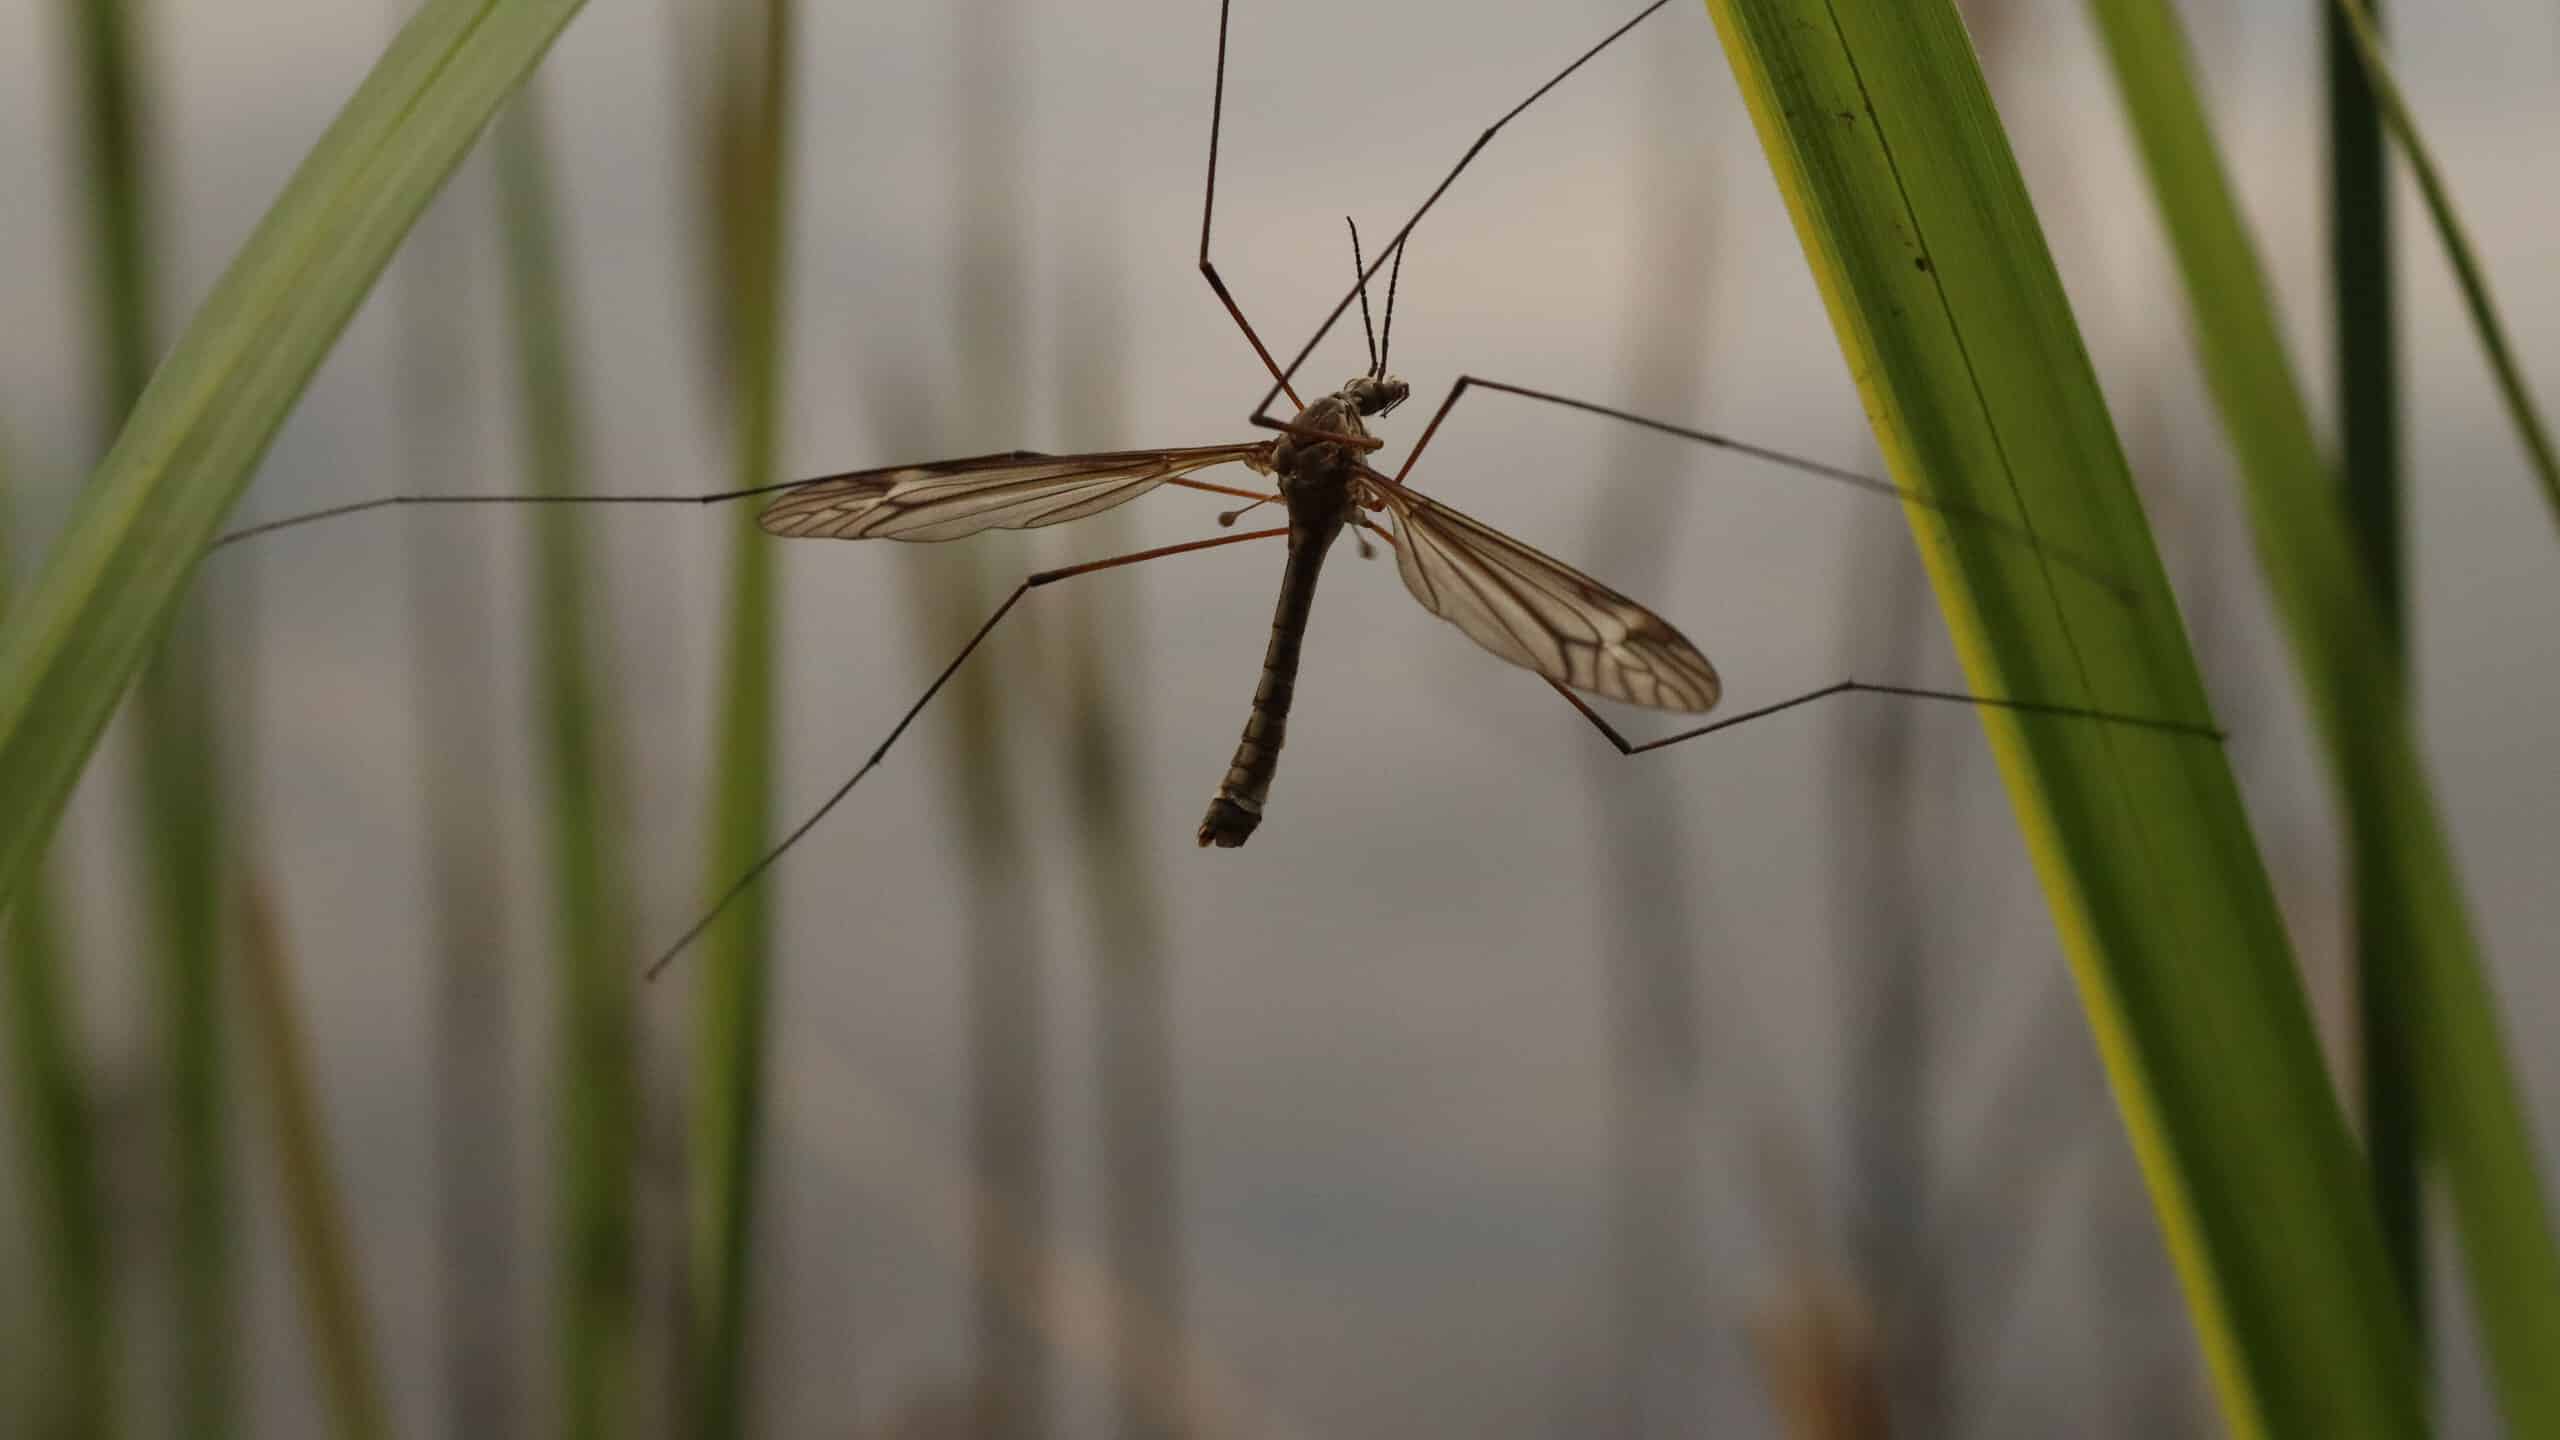 Closeup of a cranefly on leaves.